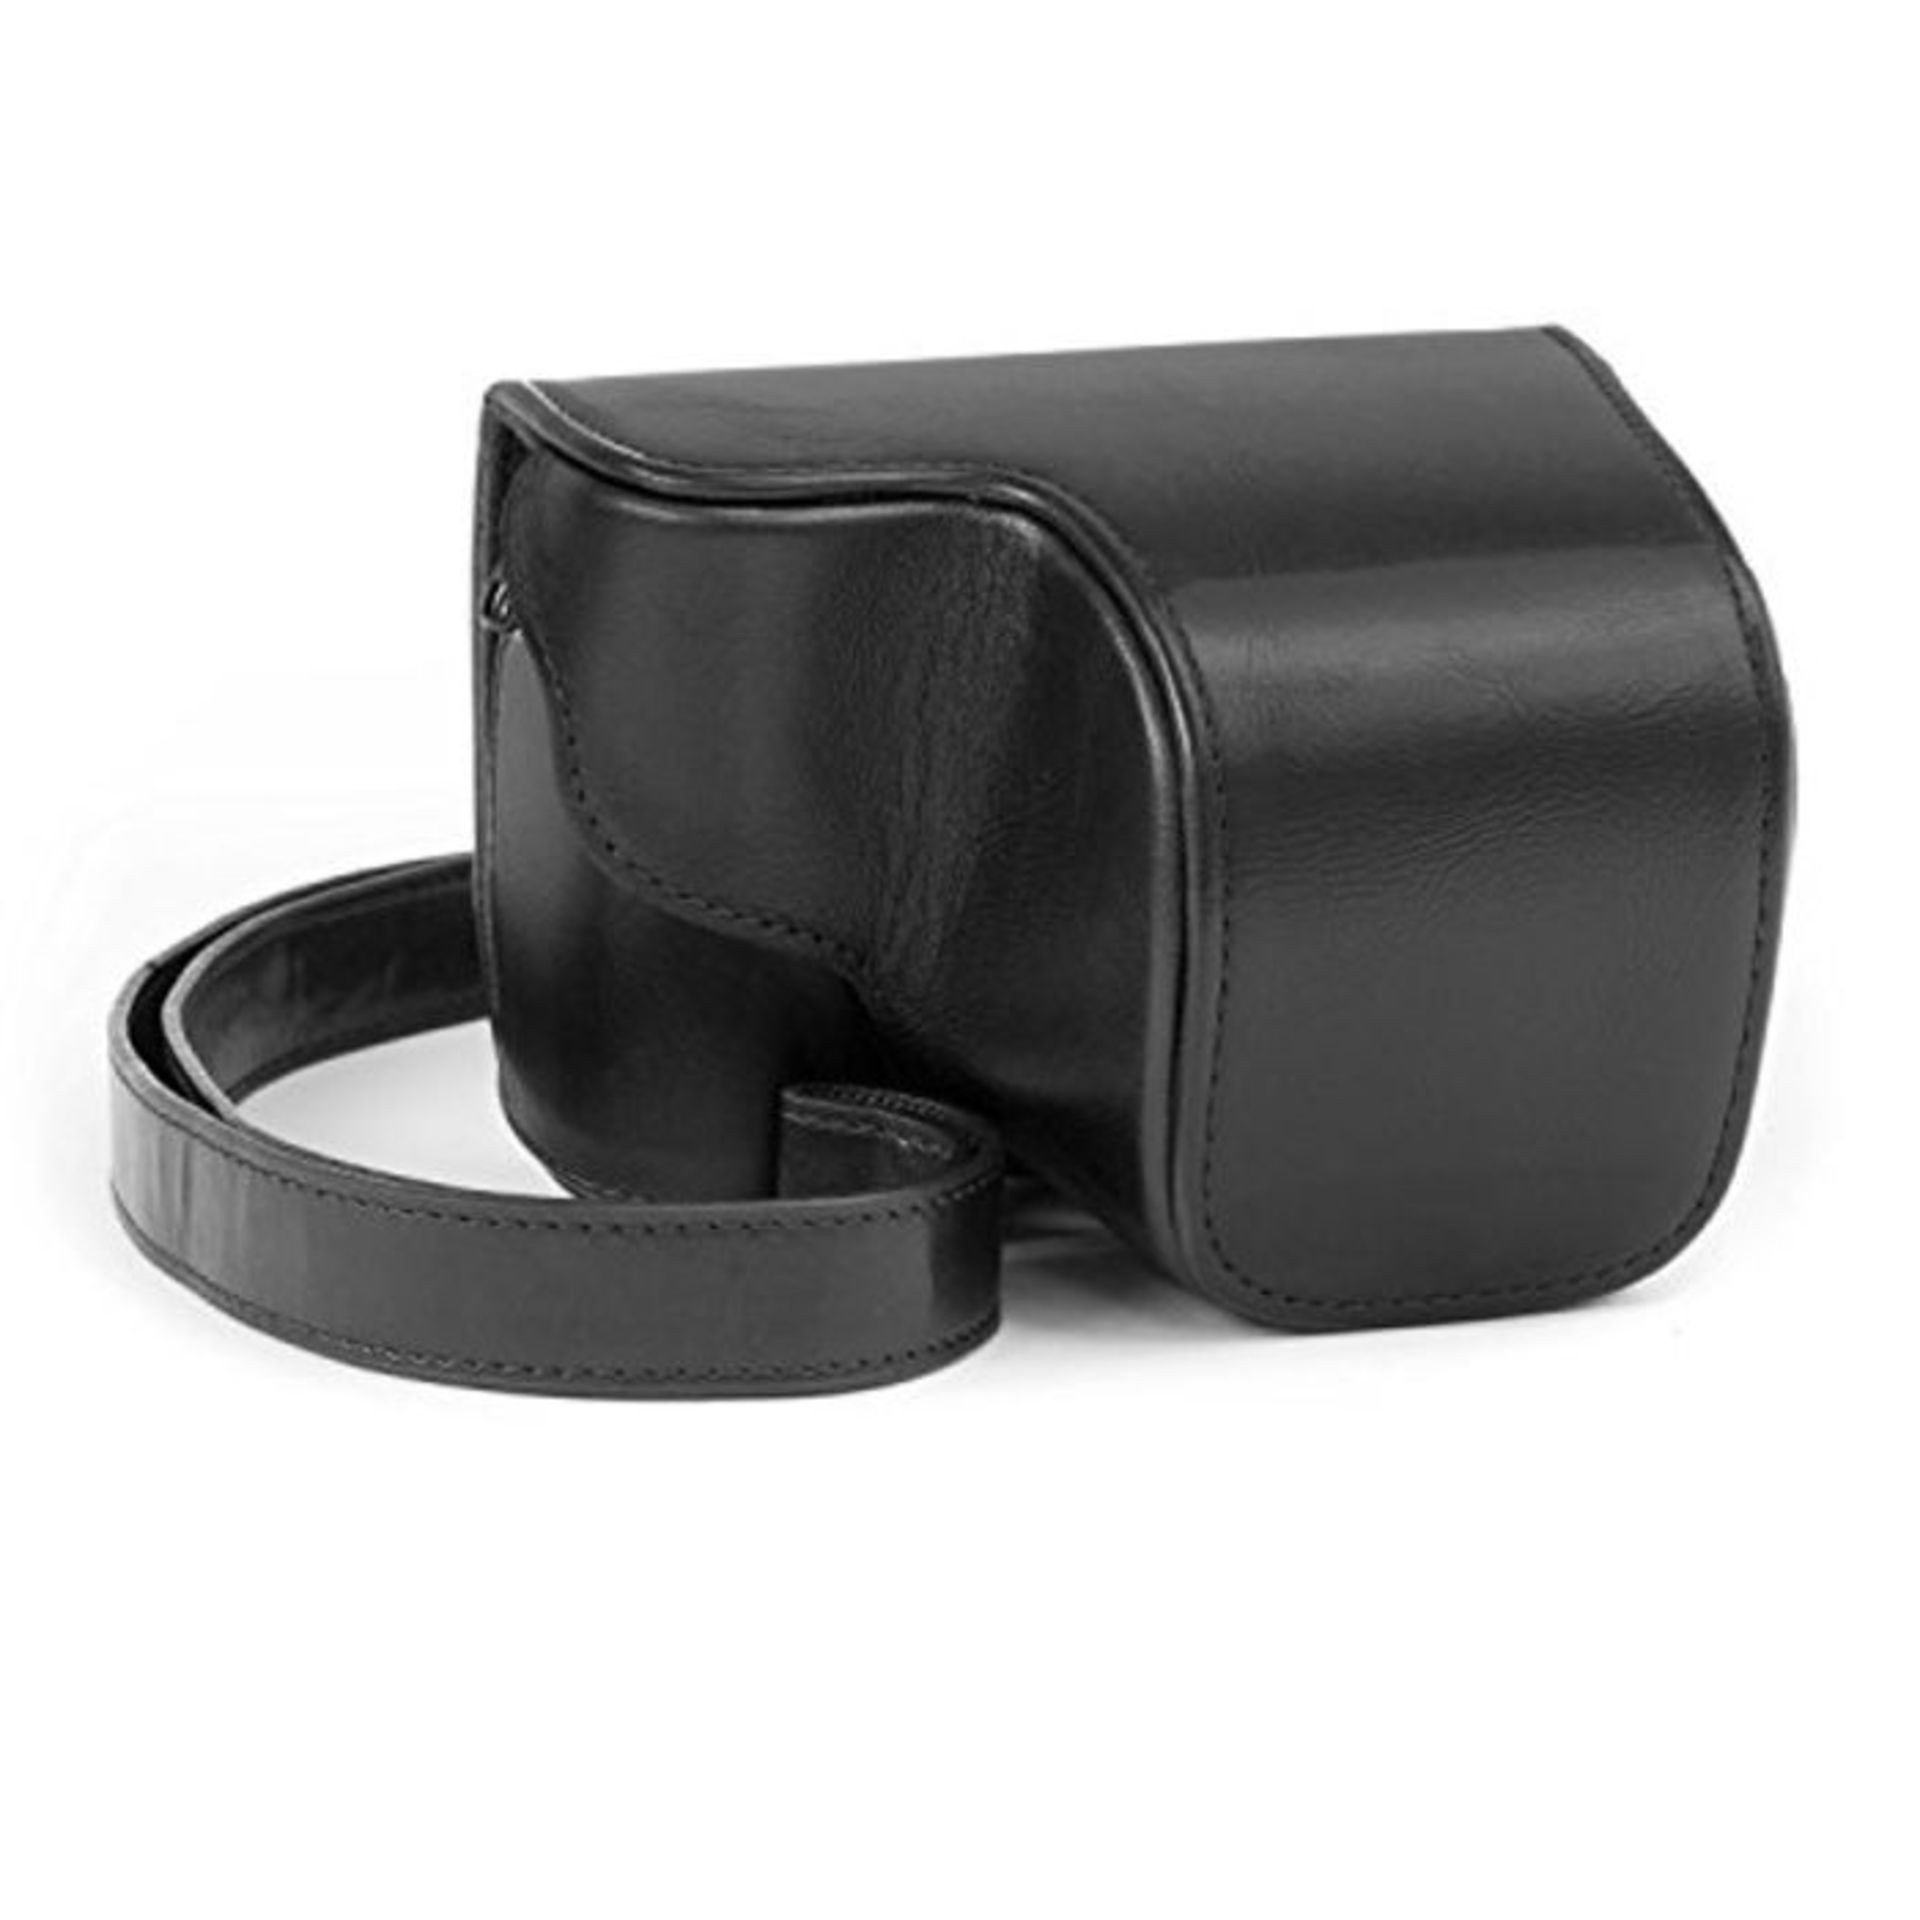 MegaGear MG309 "Ever Ready" Protective Leather Camera Case, Bag for Sony Alpha a5000,